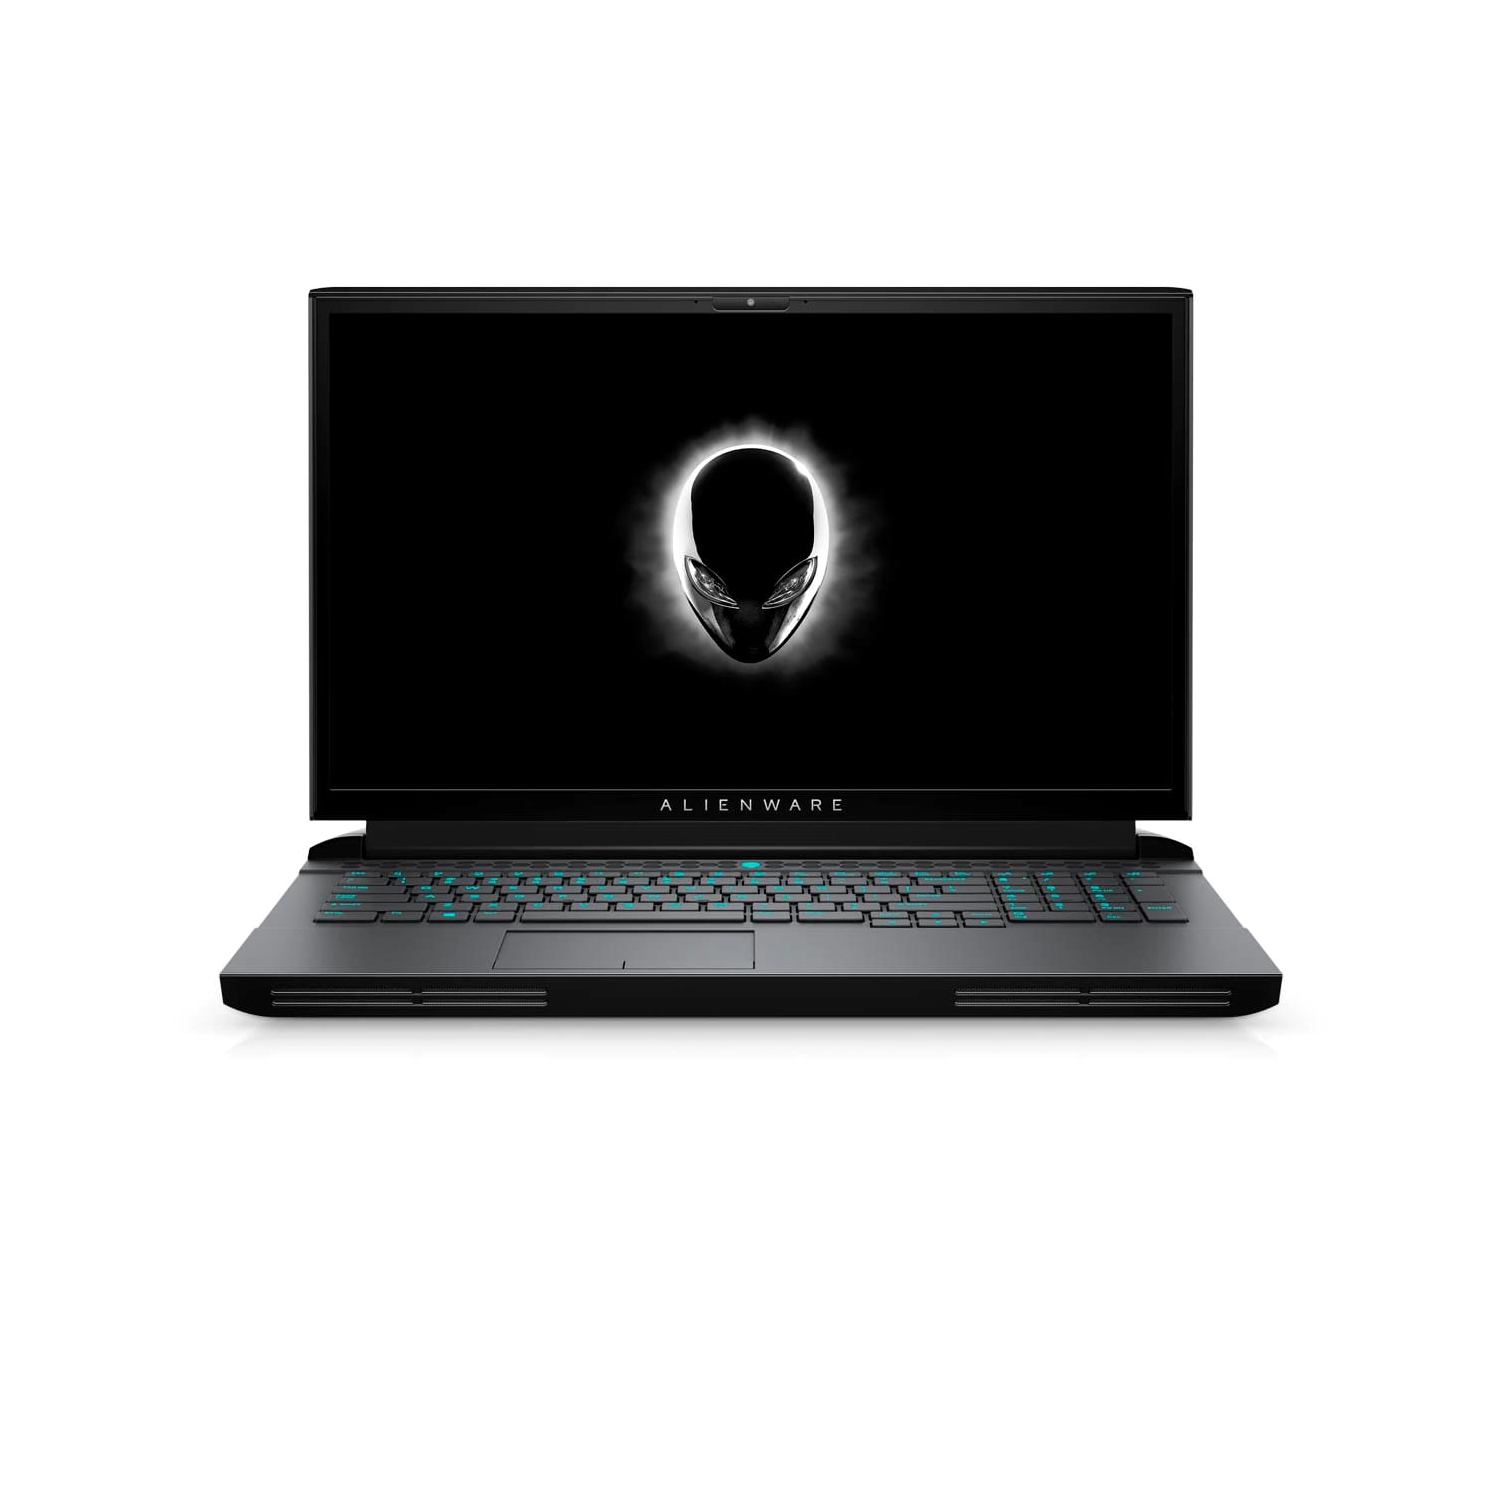 Refurbished (Excellent) - Dell Alienware 17 51m R2 Gaming Laptop (2020), 17.3" FHD, Core i7, 256GB SSD, 16GB RAM, RTX 2060, 8 Cores @ 4.8 GHz, 10th Gen CPU Certified